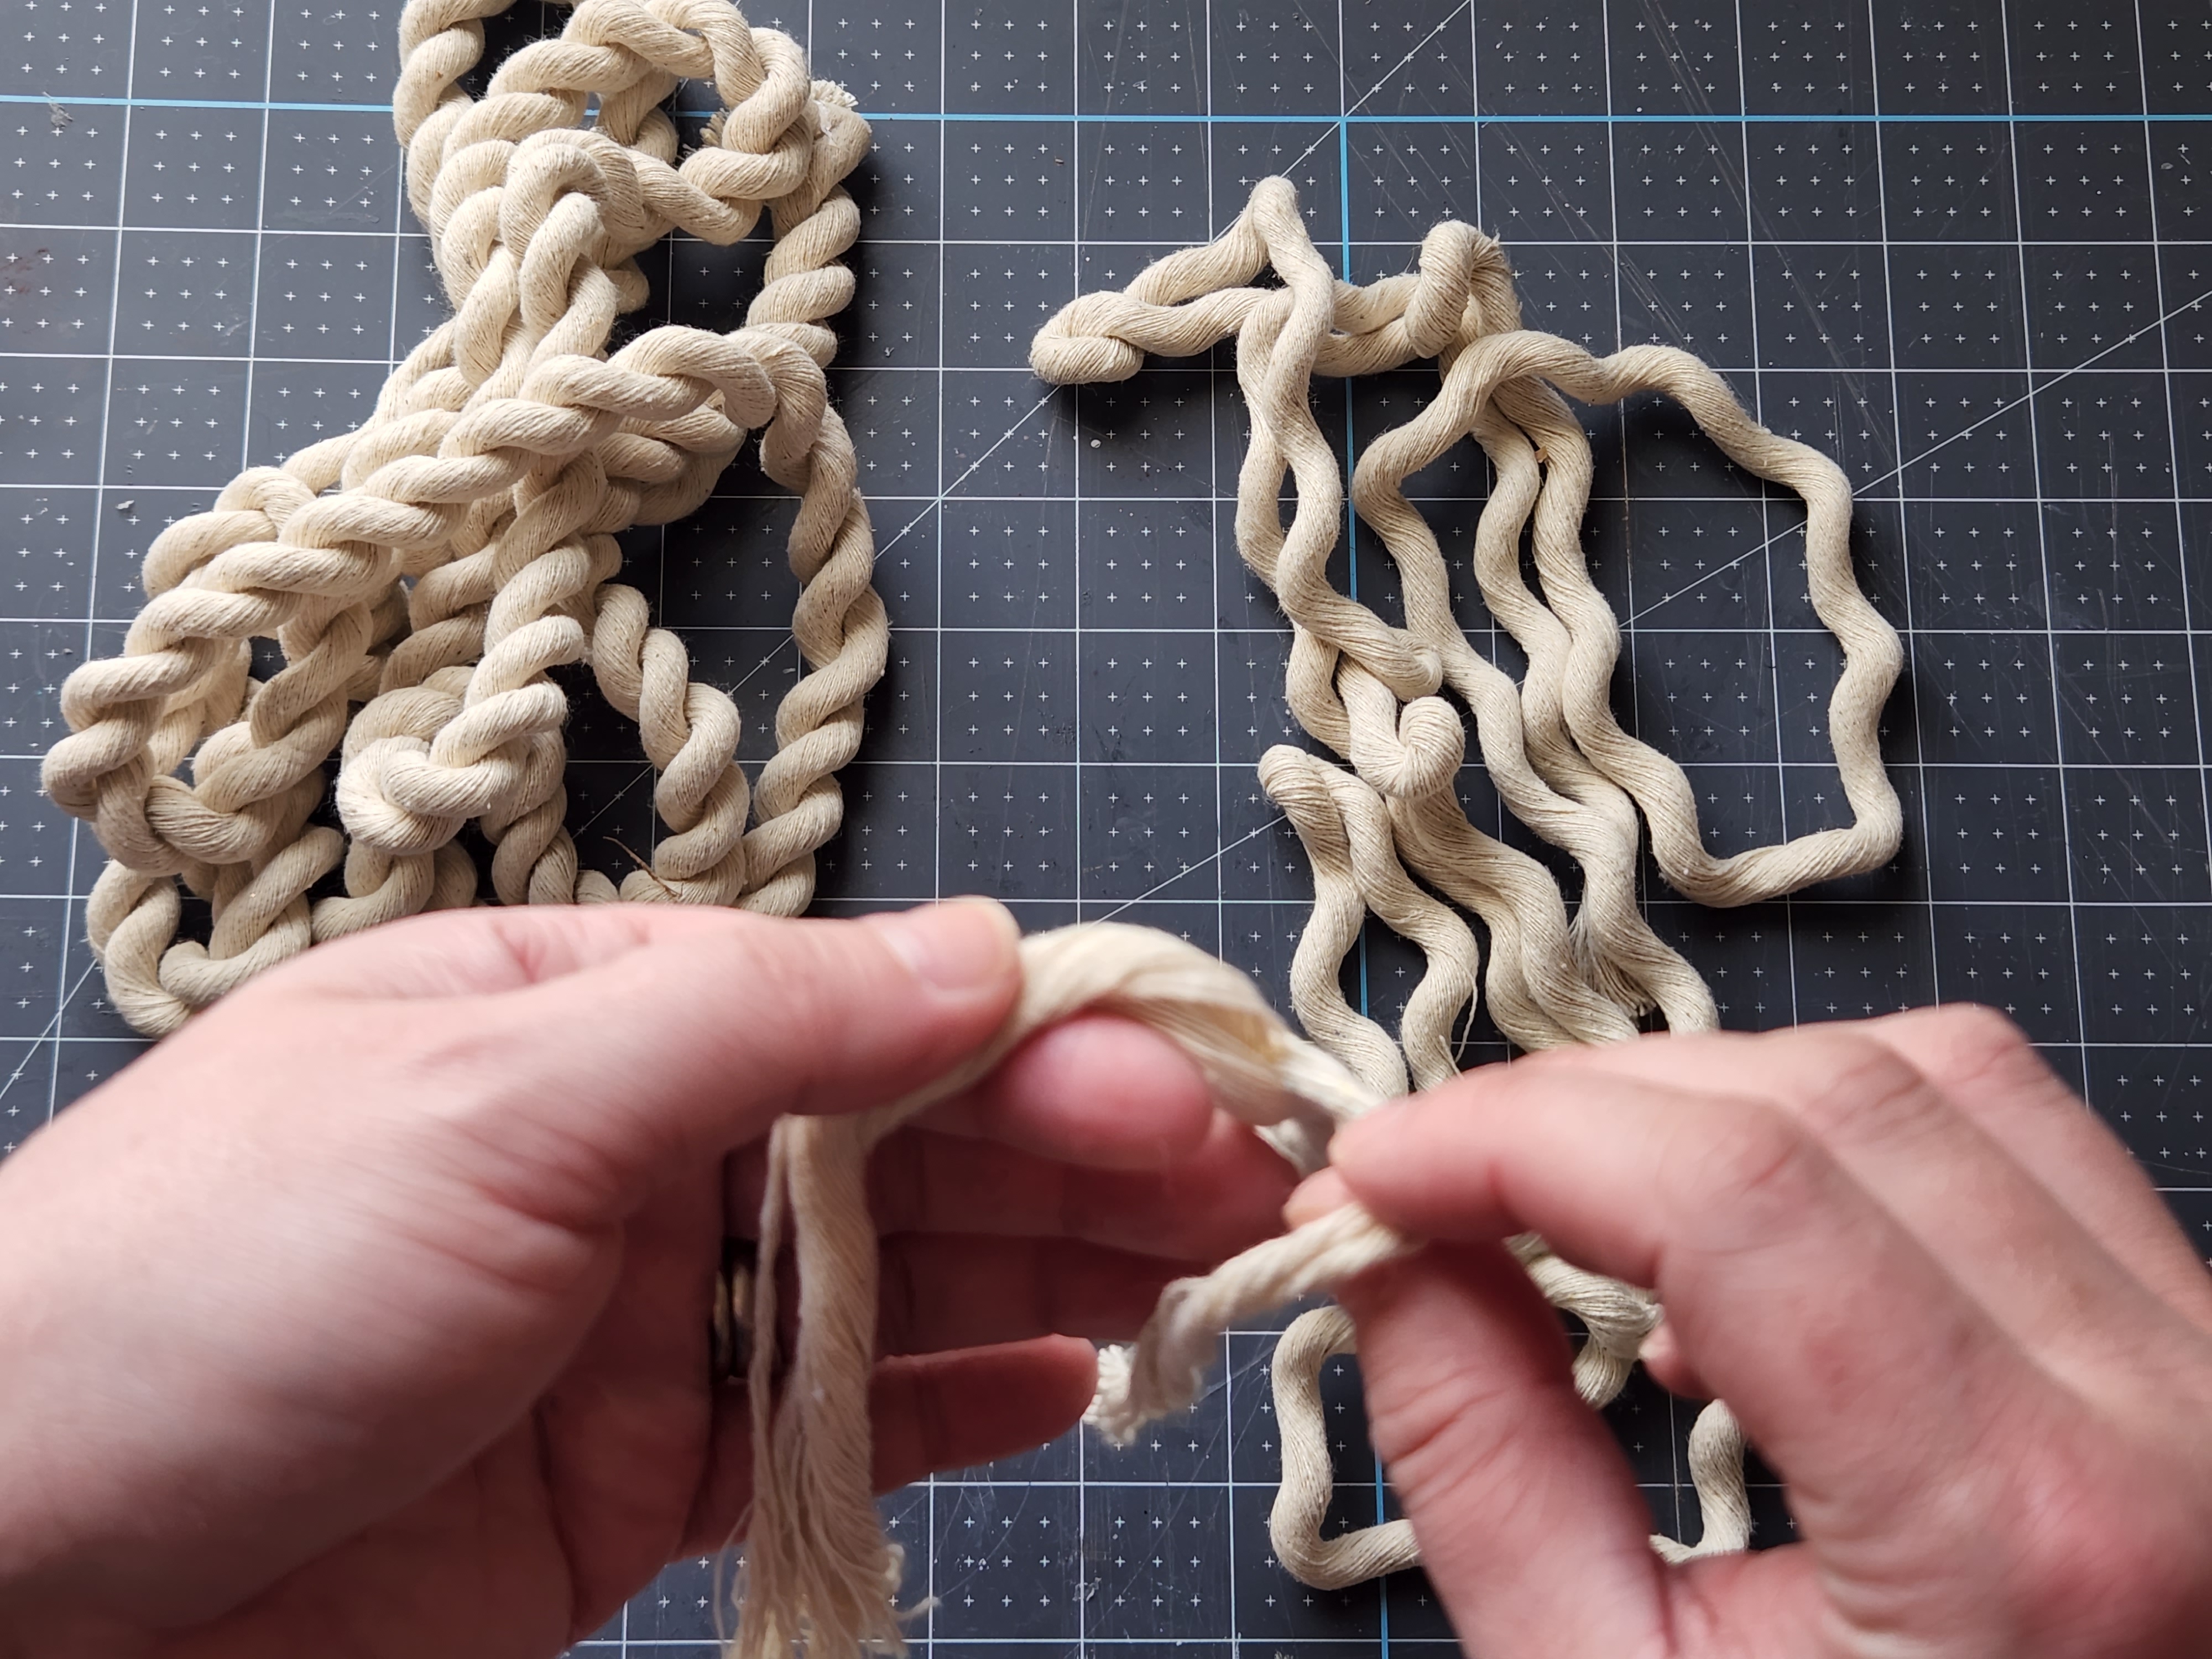 Unraveling one of the three strands from the rope to use on the wreath.